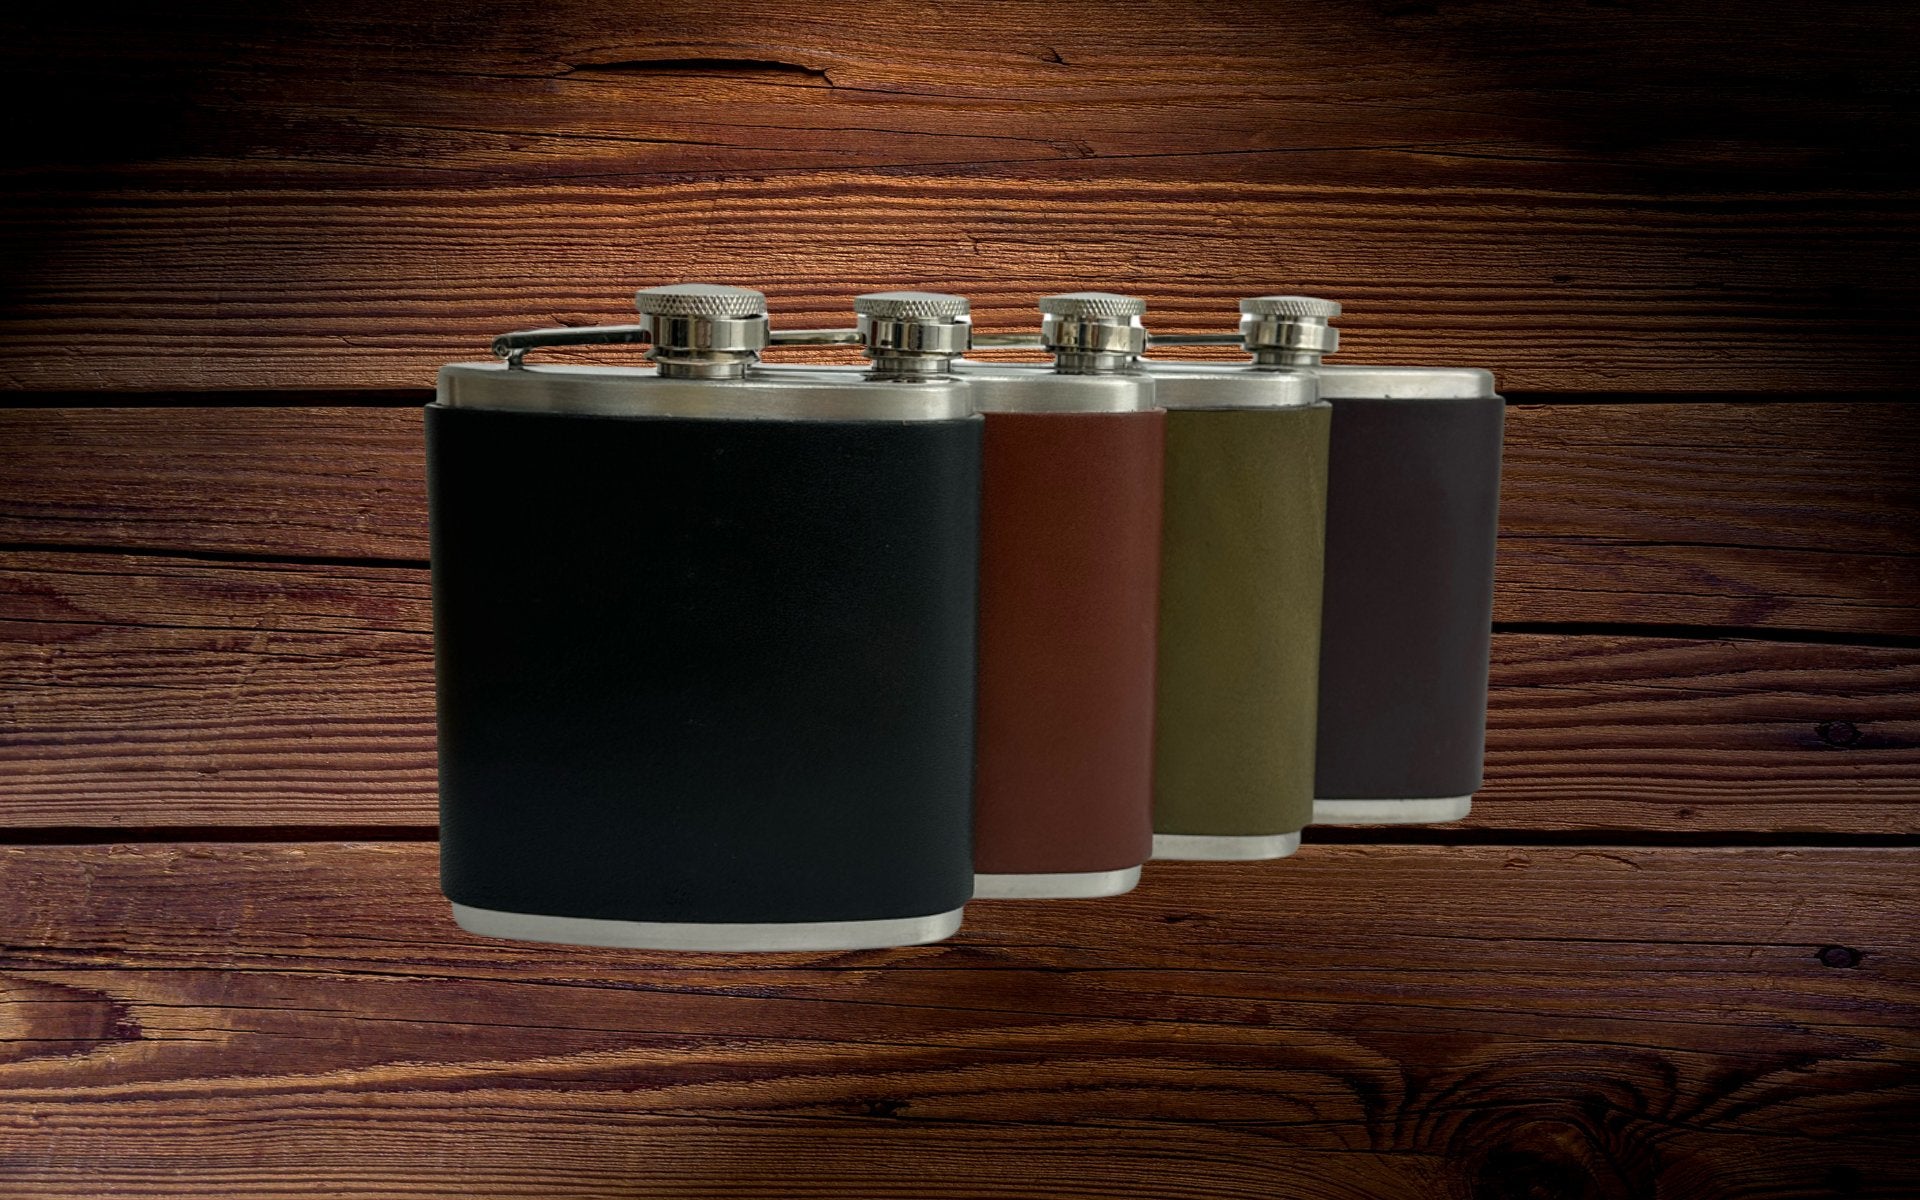 Leather Covered Flask